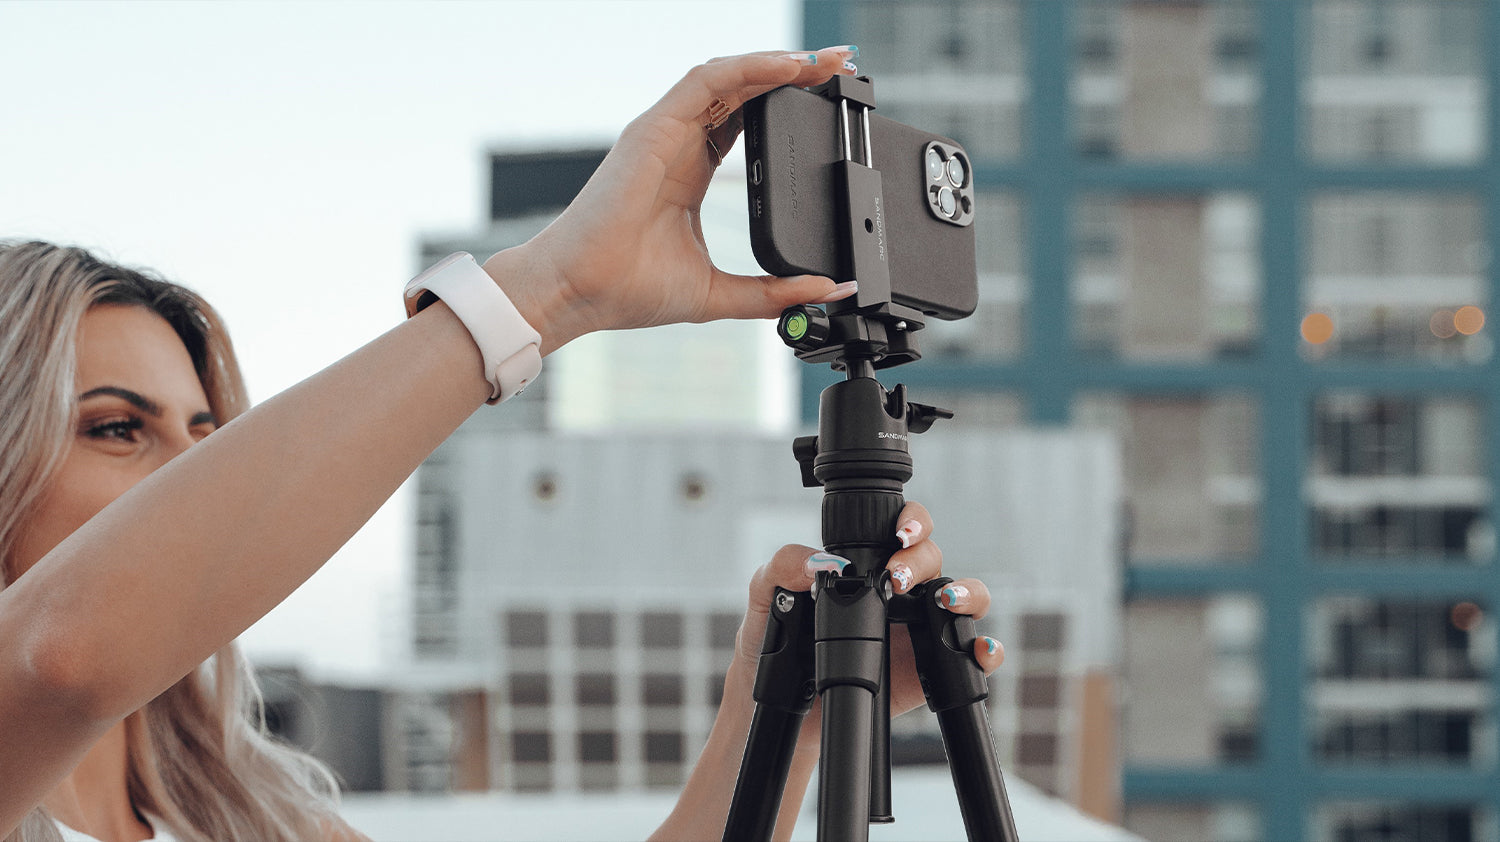 How to use an iPhone Tripod